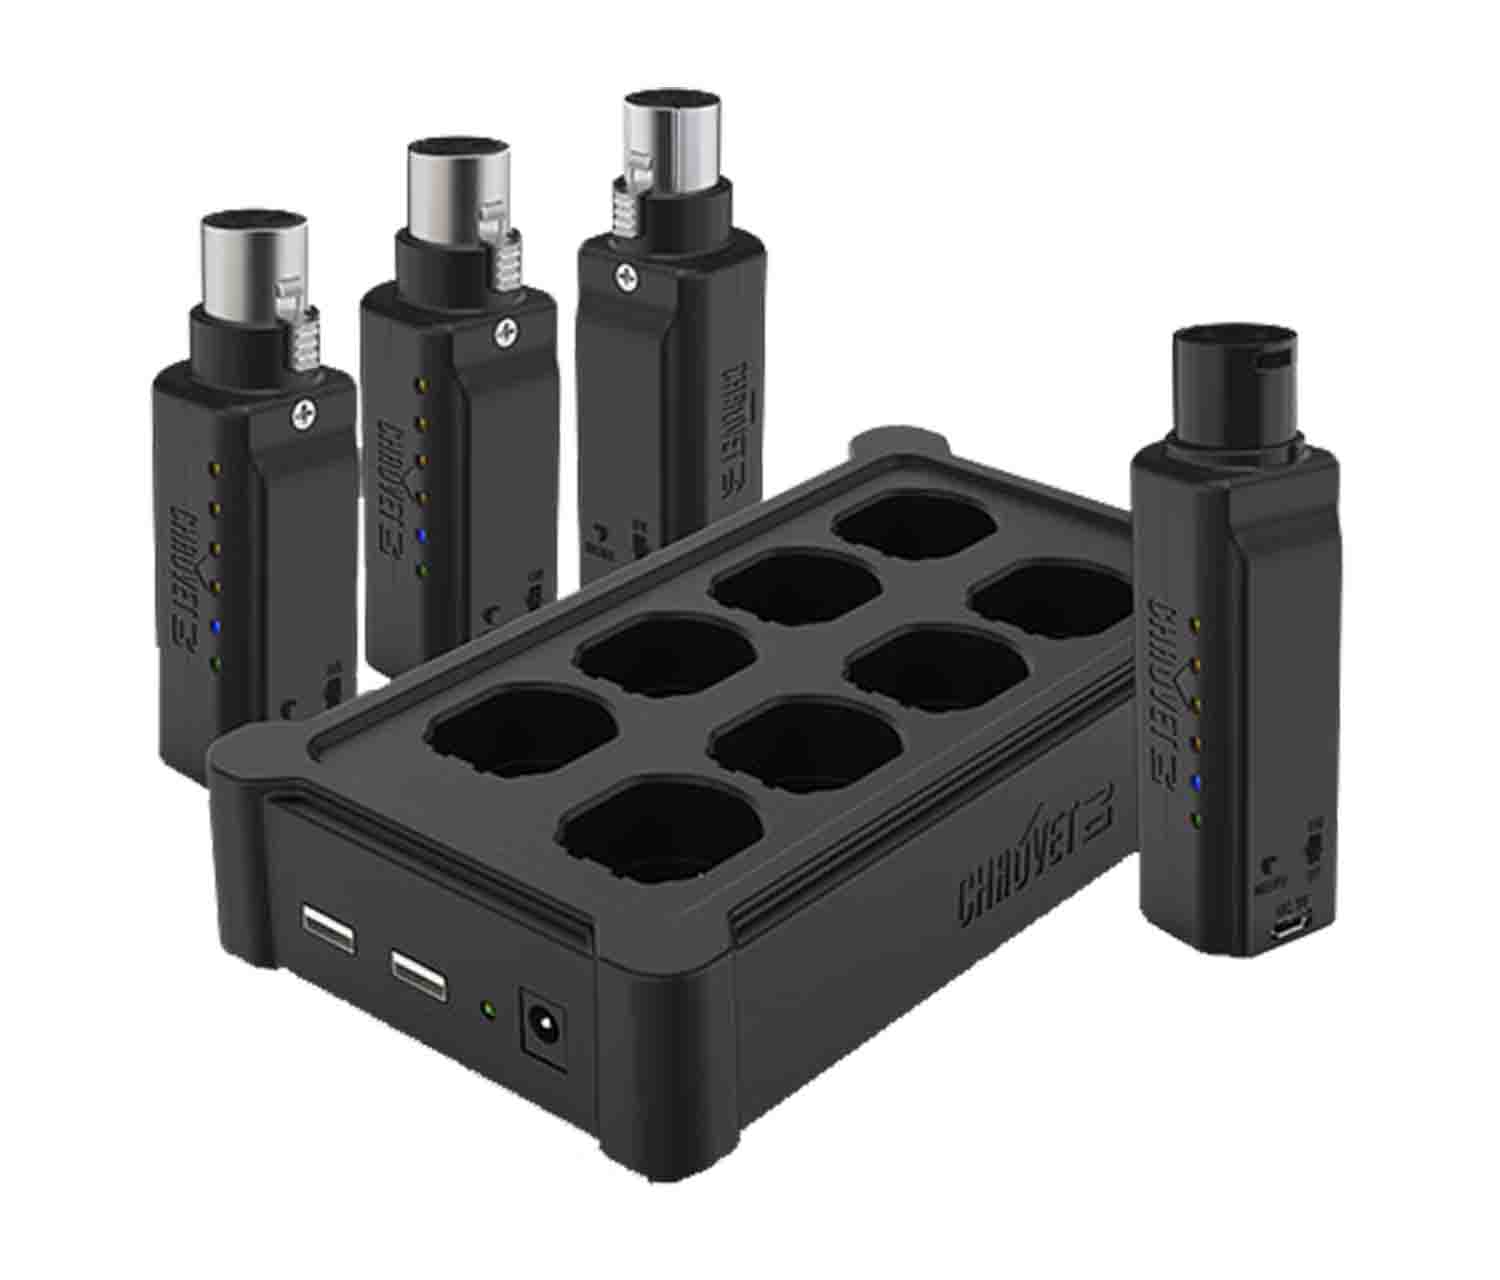 Chauvet DJ D-Fi XLR Pack, Wireless Communication Pack Includes 1 Transmitter, 3 Receivers and 1 Multi Charger - Hollywood DJ